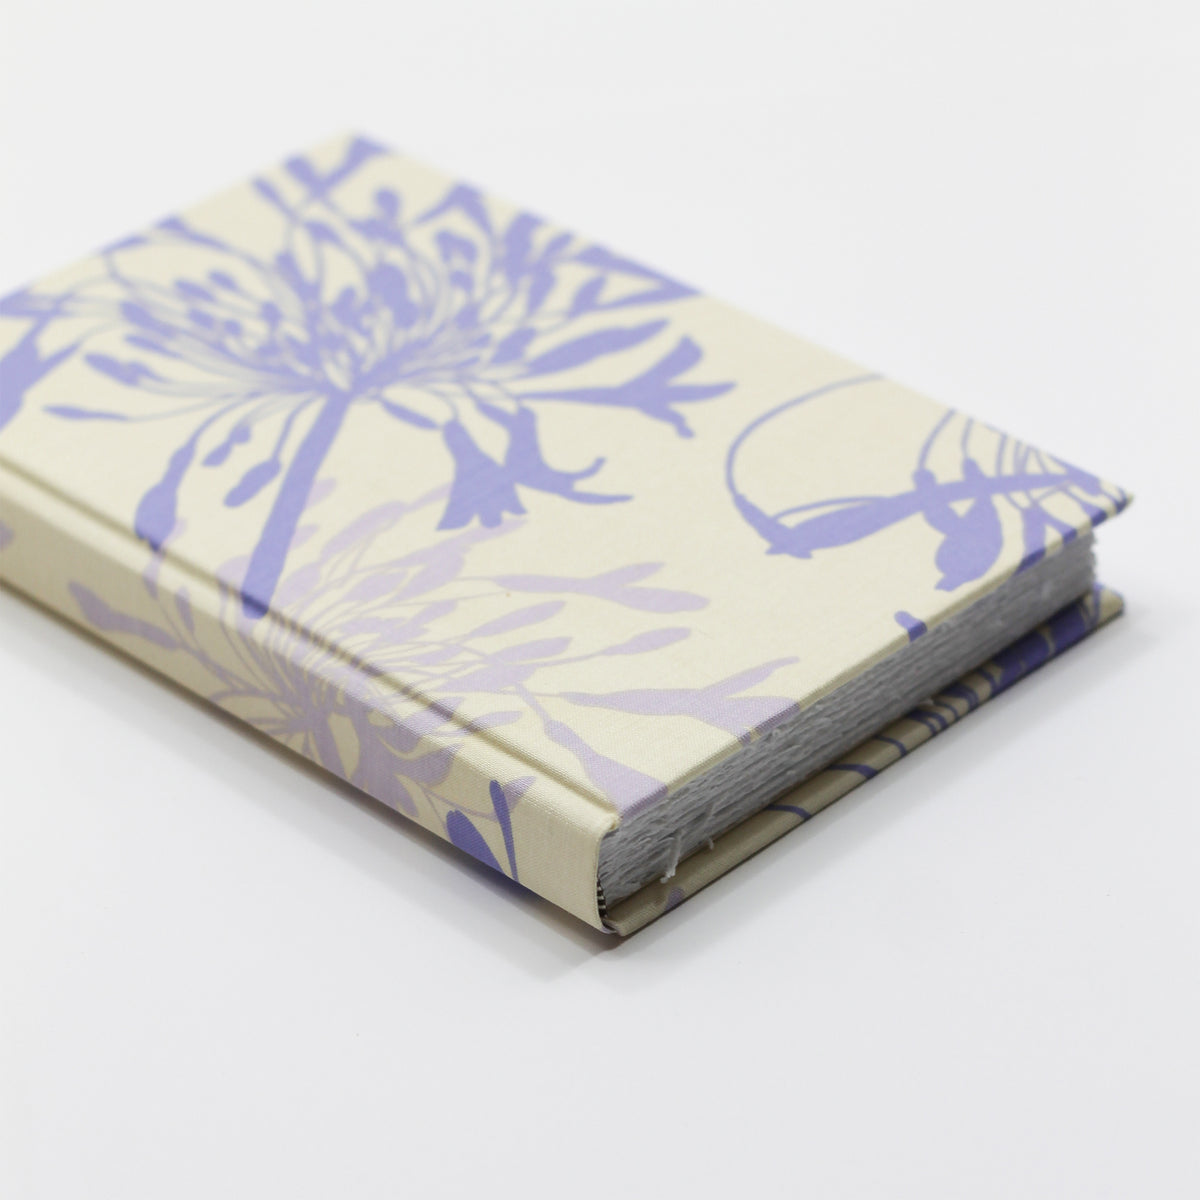 Medium 5.5x8.5 Blank Page Journal | Cover: Lilac Flower